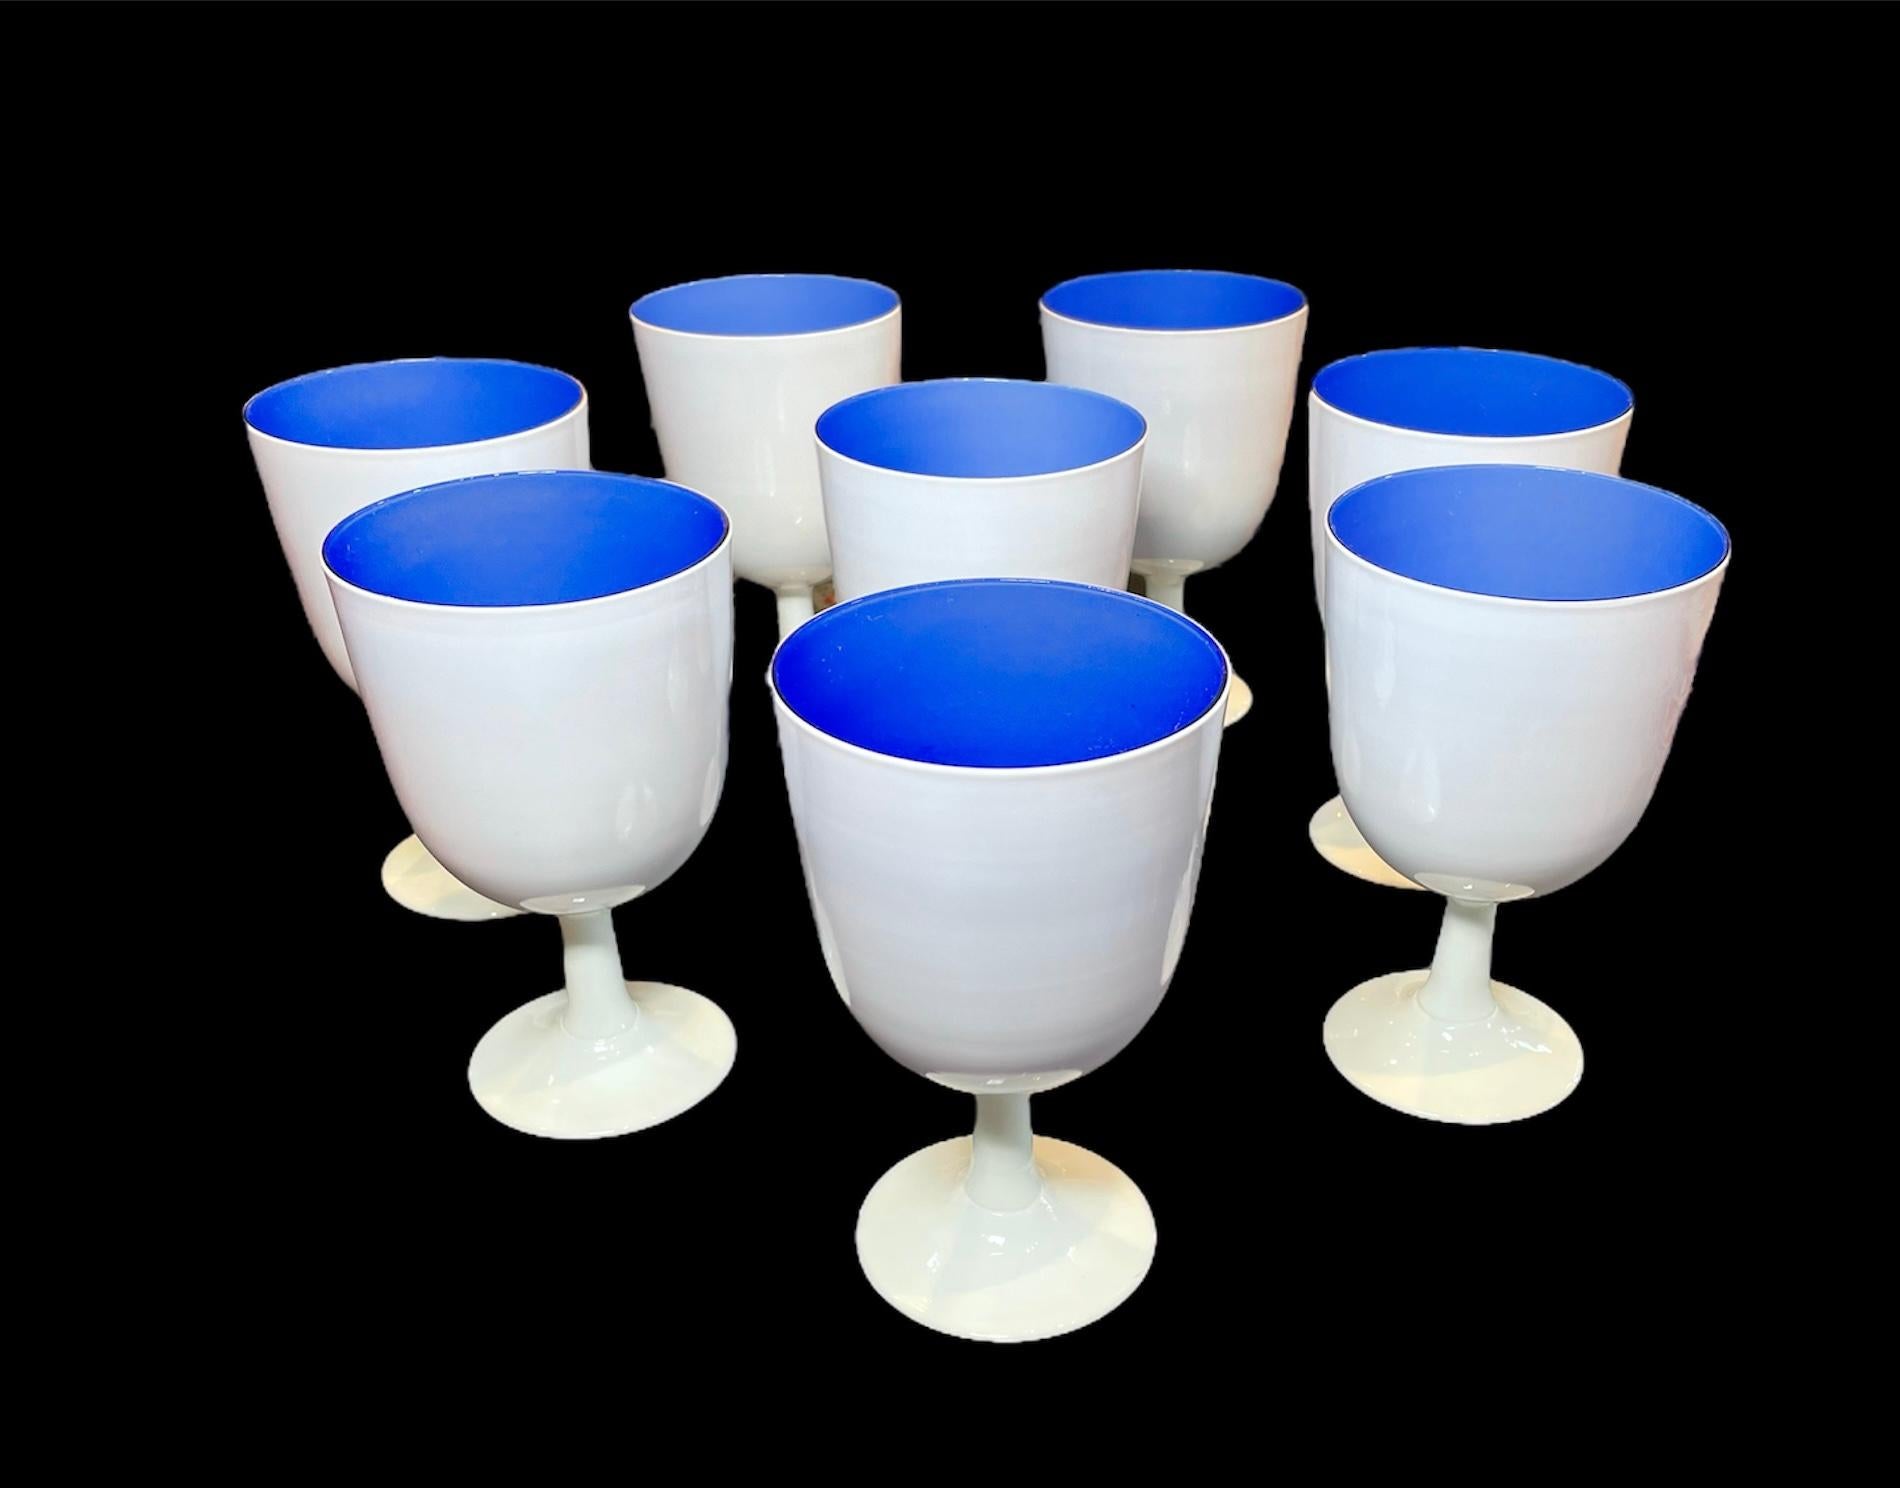 This is a Carlo Moretti set of 8 white and confined blue color. Murano glass goblets. It depicts a set of bell shaped goblets.